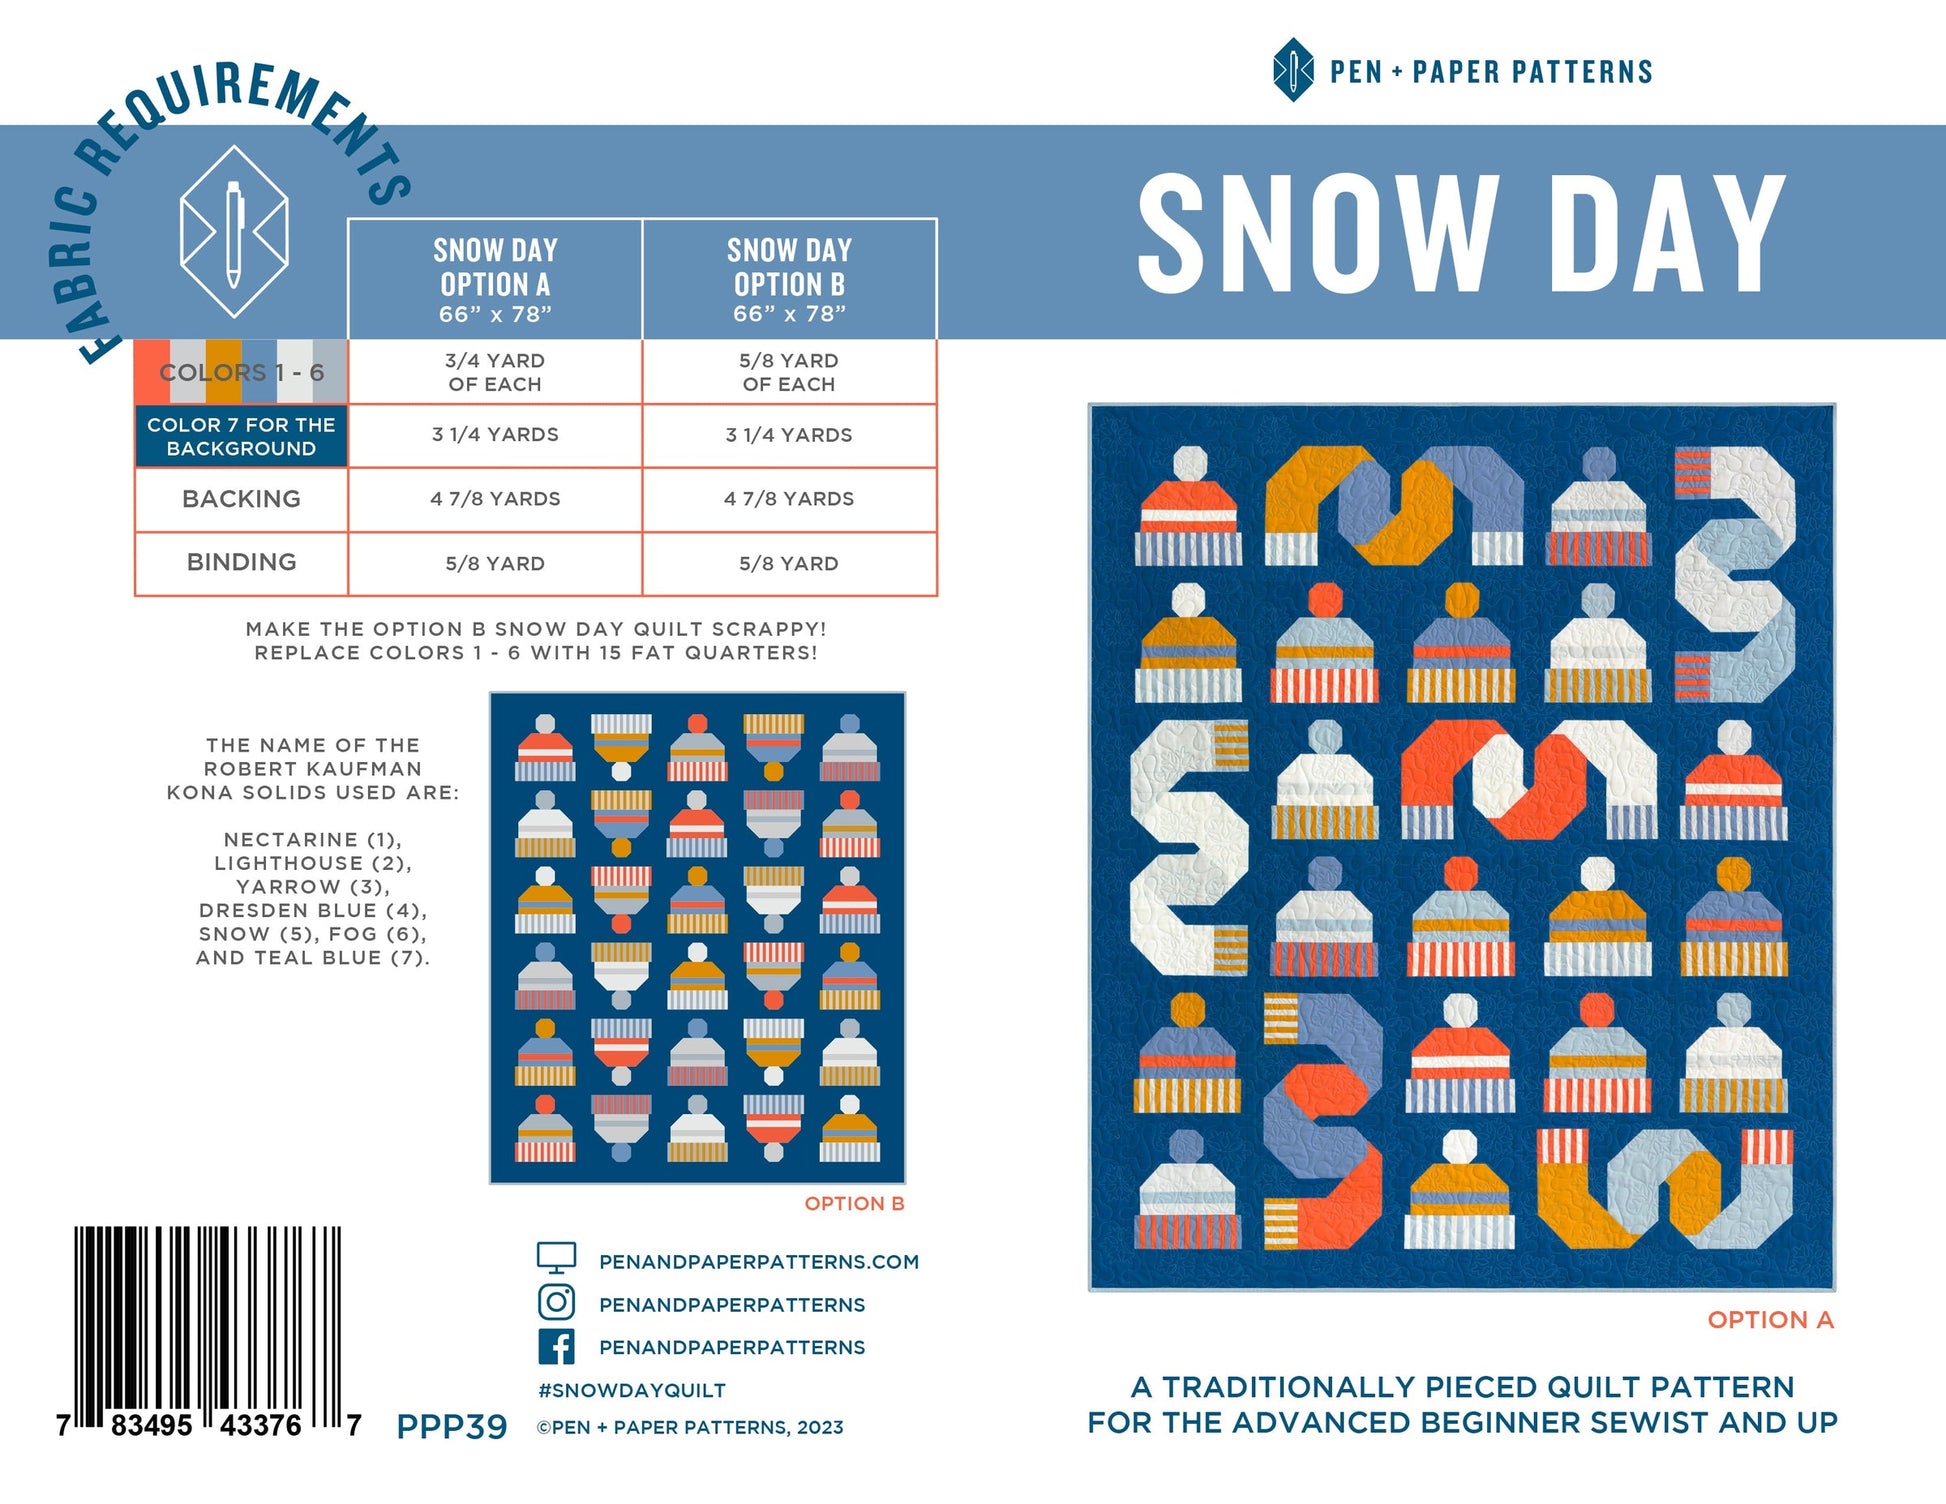 Other Snow Day Quilt Pattern by Pen + Paper Patterns - Printed Booklet